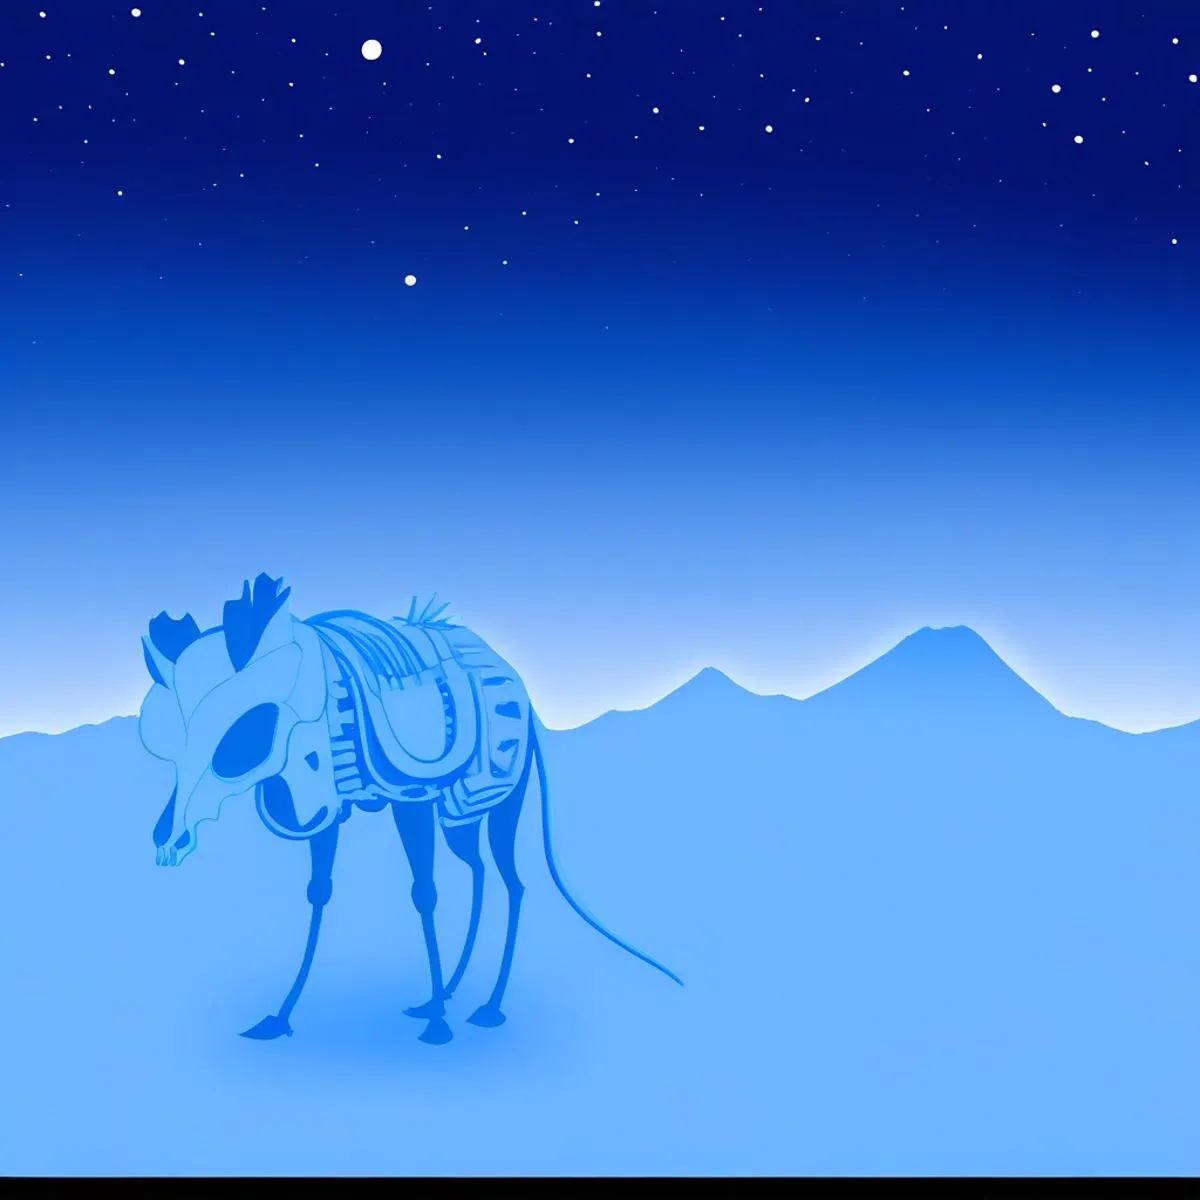 Surreal scene of a skeletal animal under a starry night sky in a blue monochromatic rocky landscape. This image was created using Stable Diffusion.